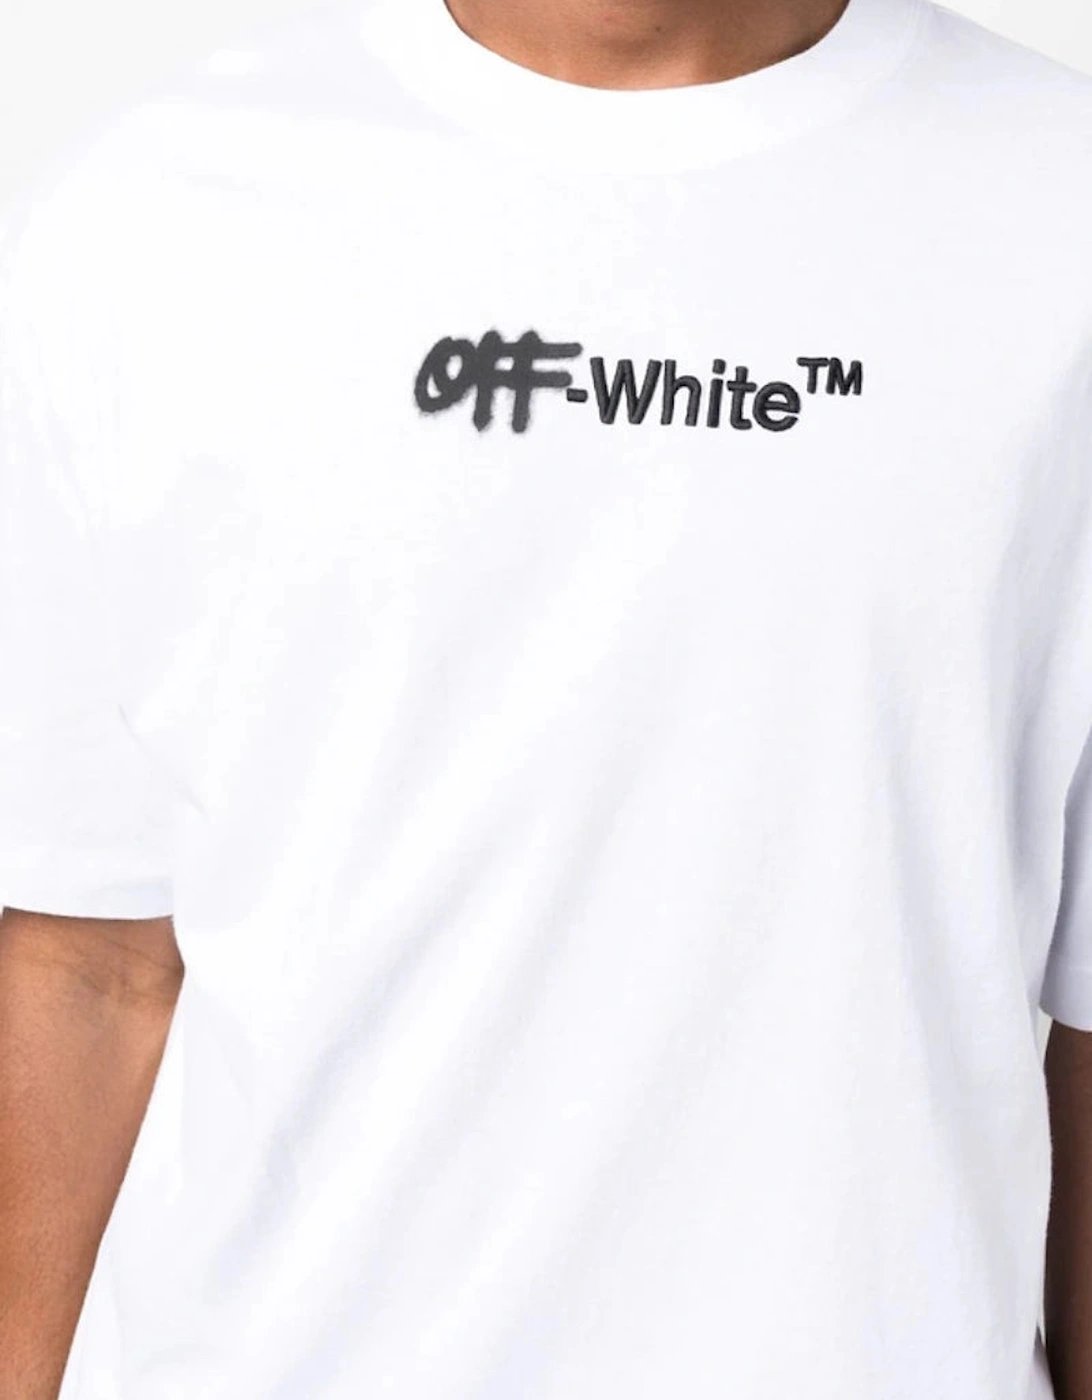 Helvetica Over-Sized T-Shirt in White